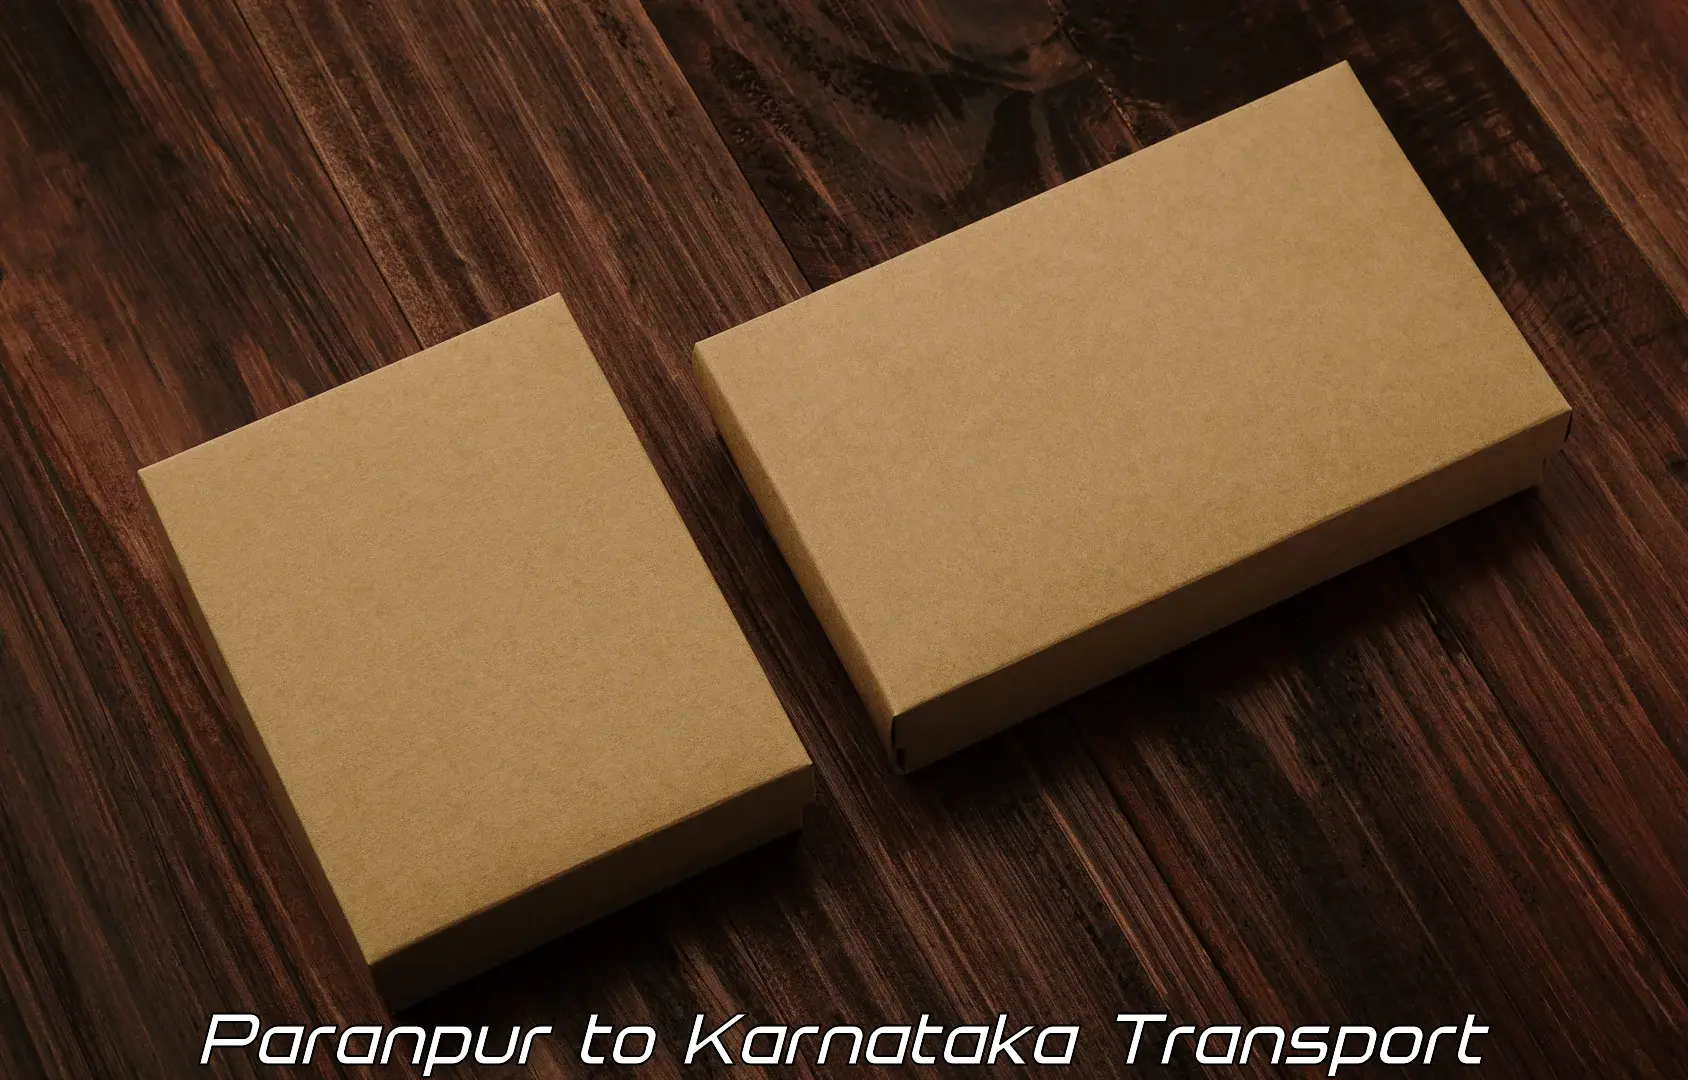 Truck transport companies in India Paranpur to Turuvekere